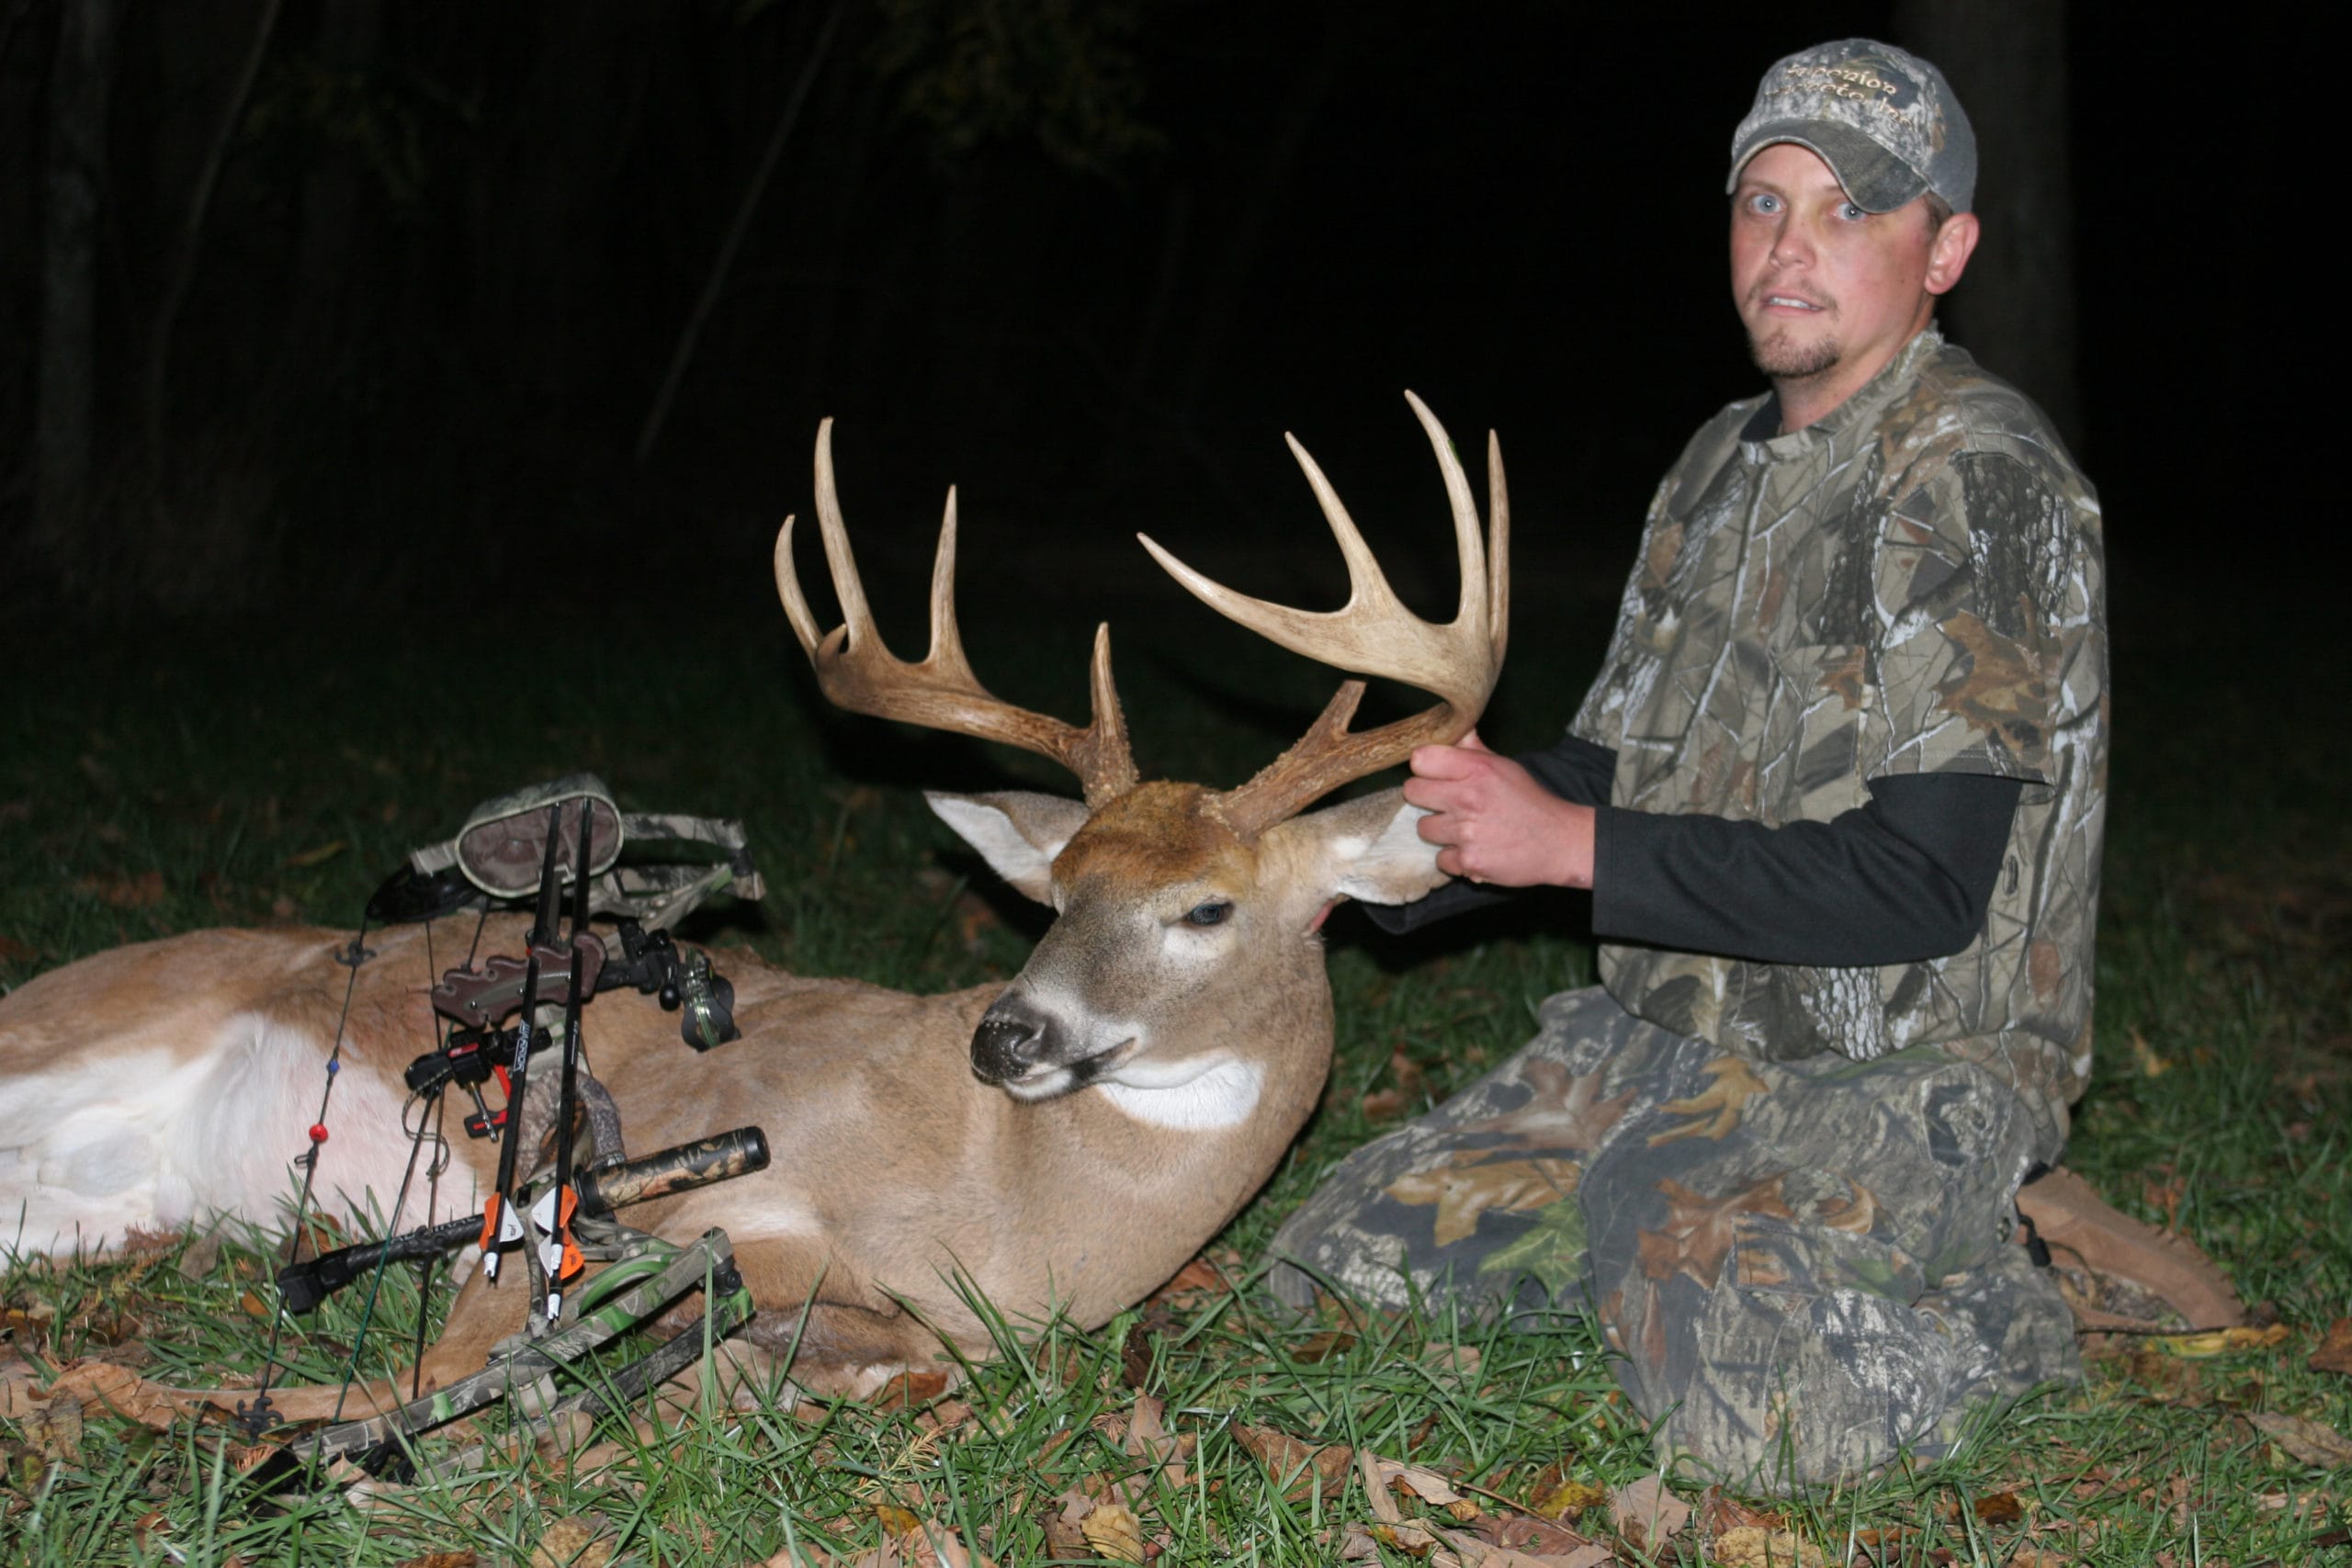 Finding and patterning trophy-class bucks is difficult, but a trail camera allows a hunter to scout more places to determine where to be hunting on opening day.